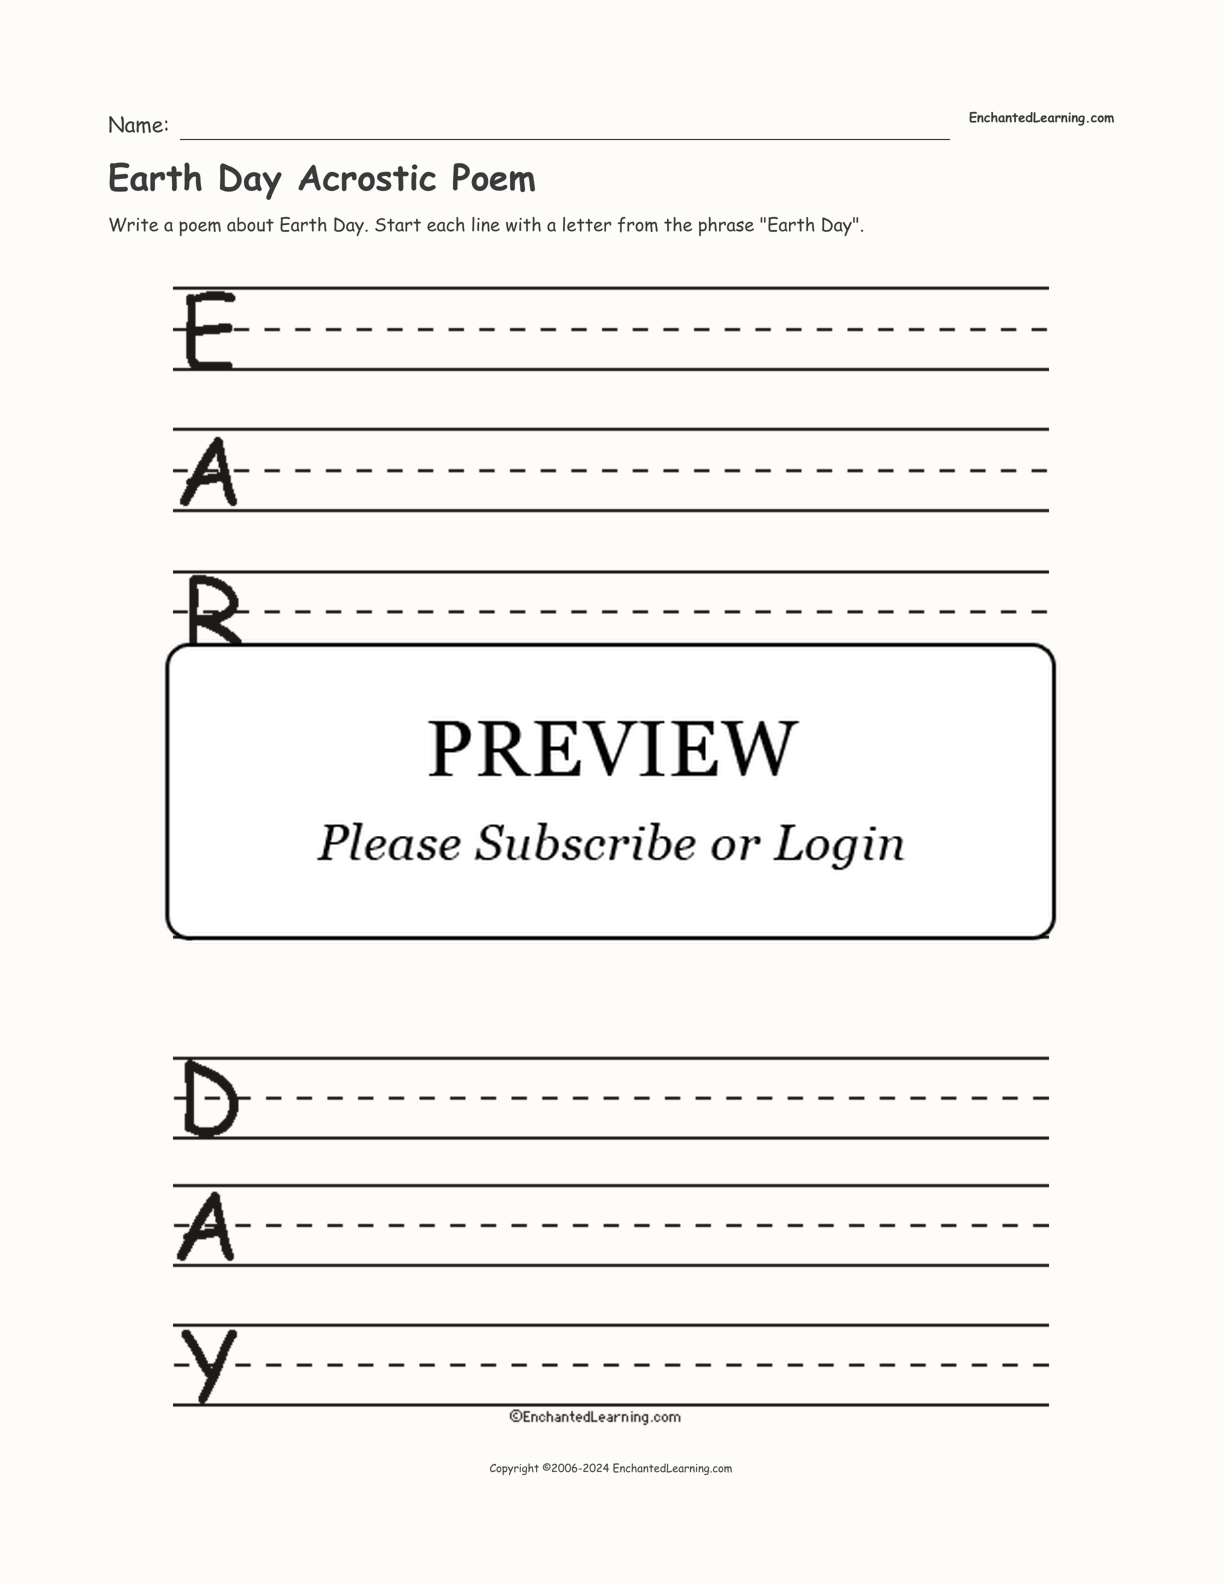 Earth Day Acrostic Poem interactive worksheet page 1